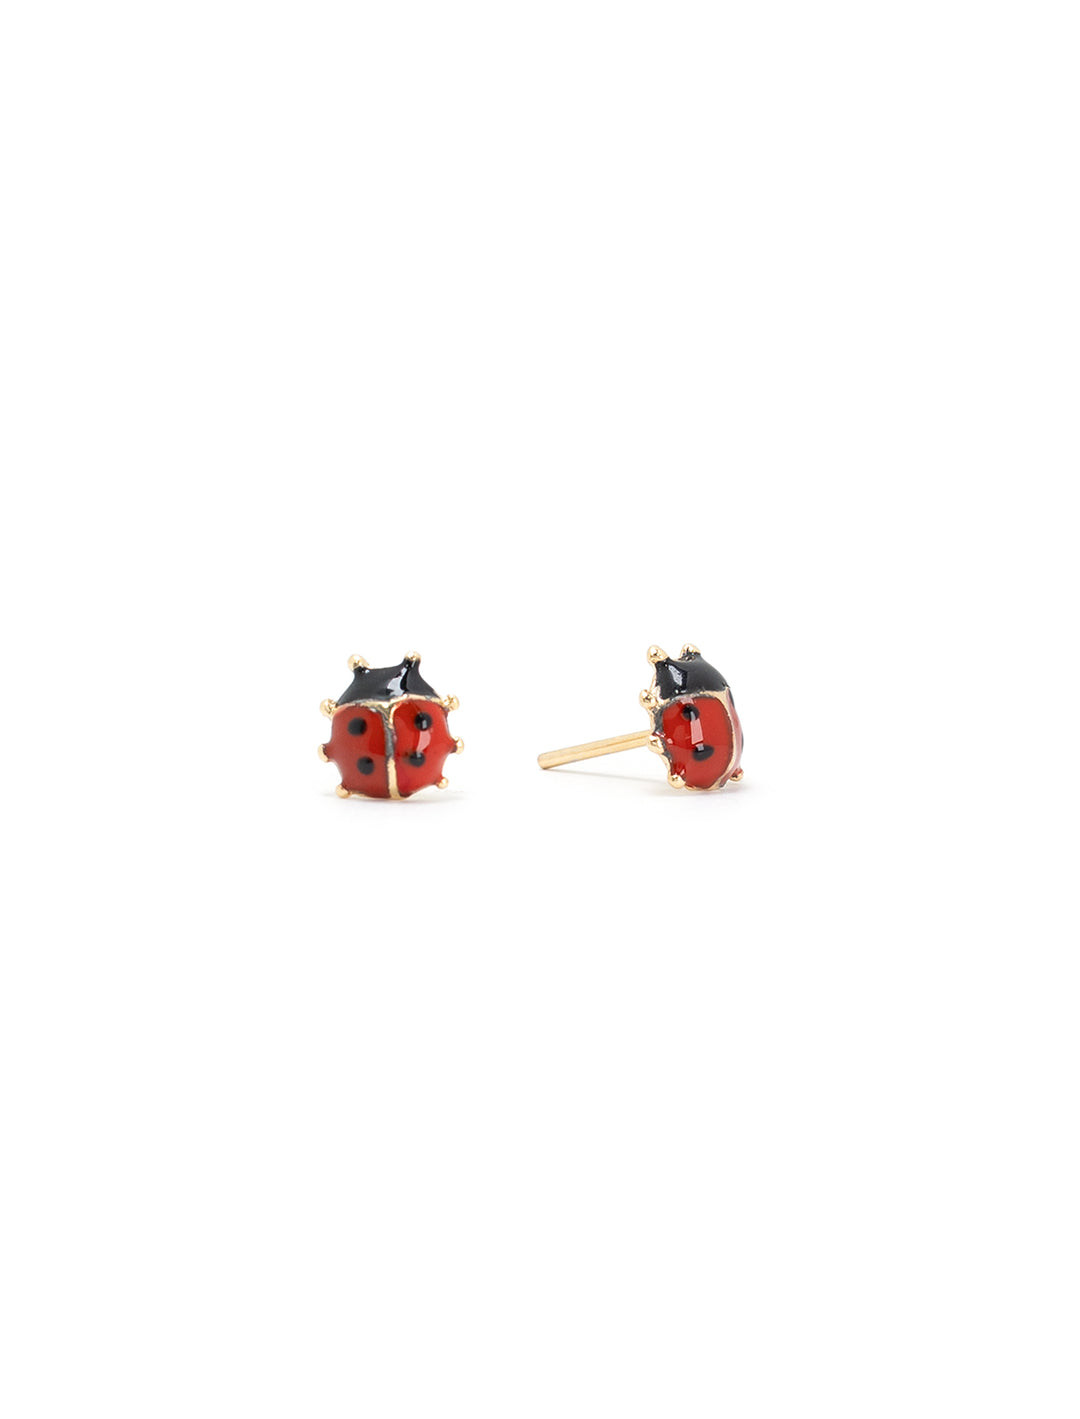 Front view of Jonesy Wood's lady bug studs.